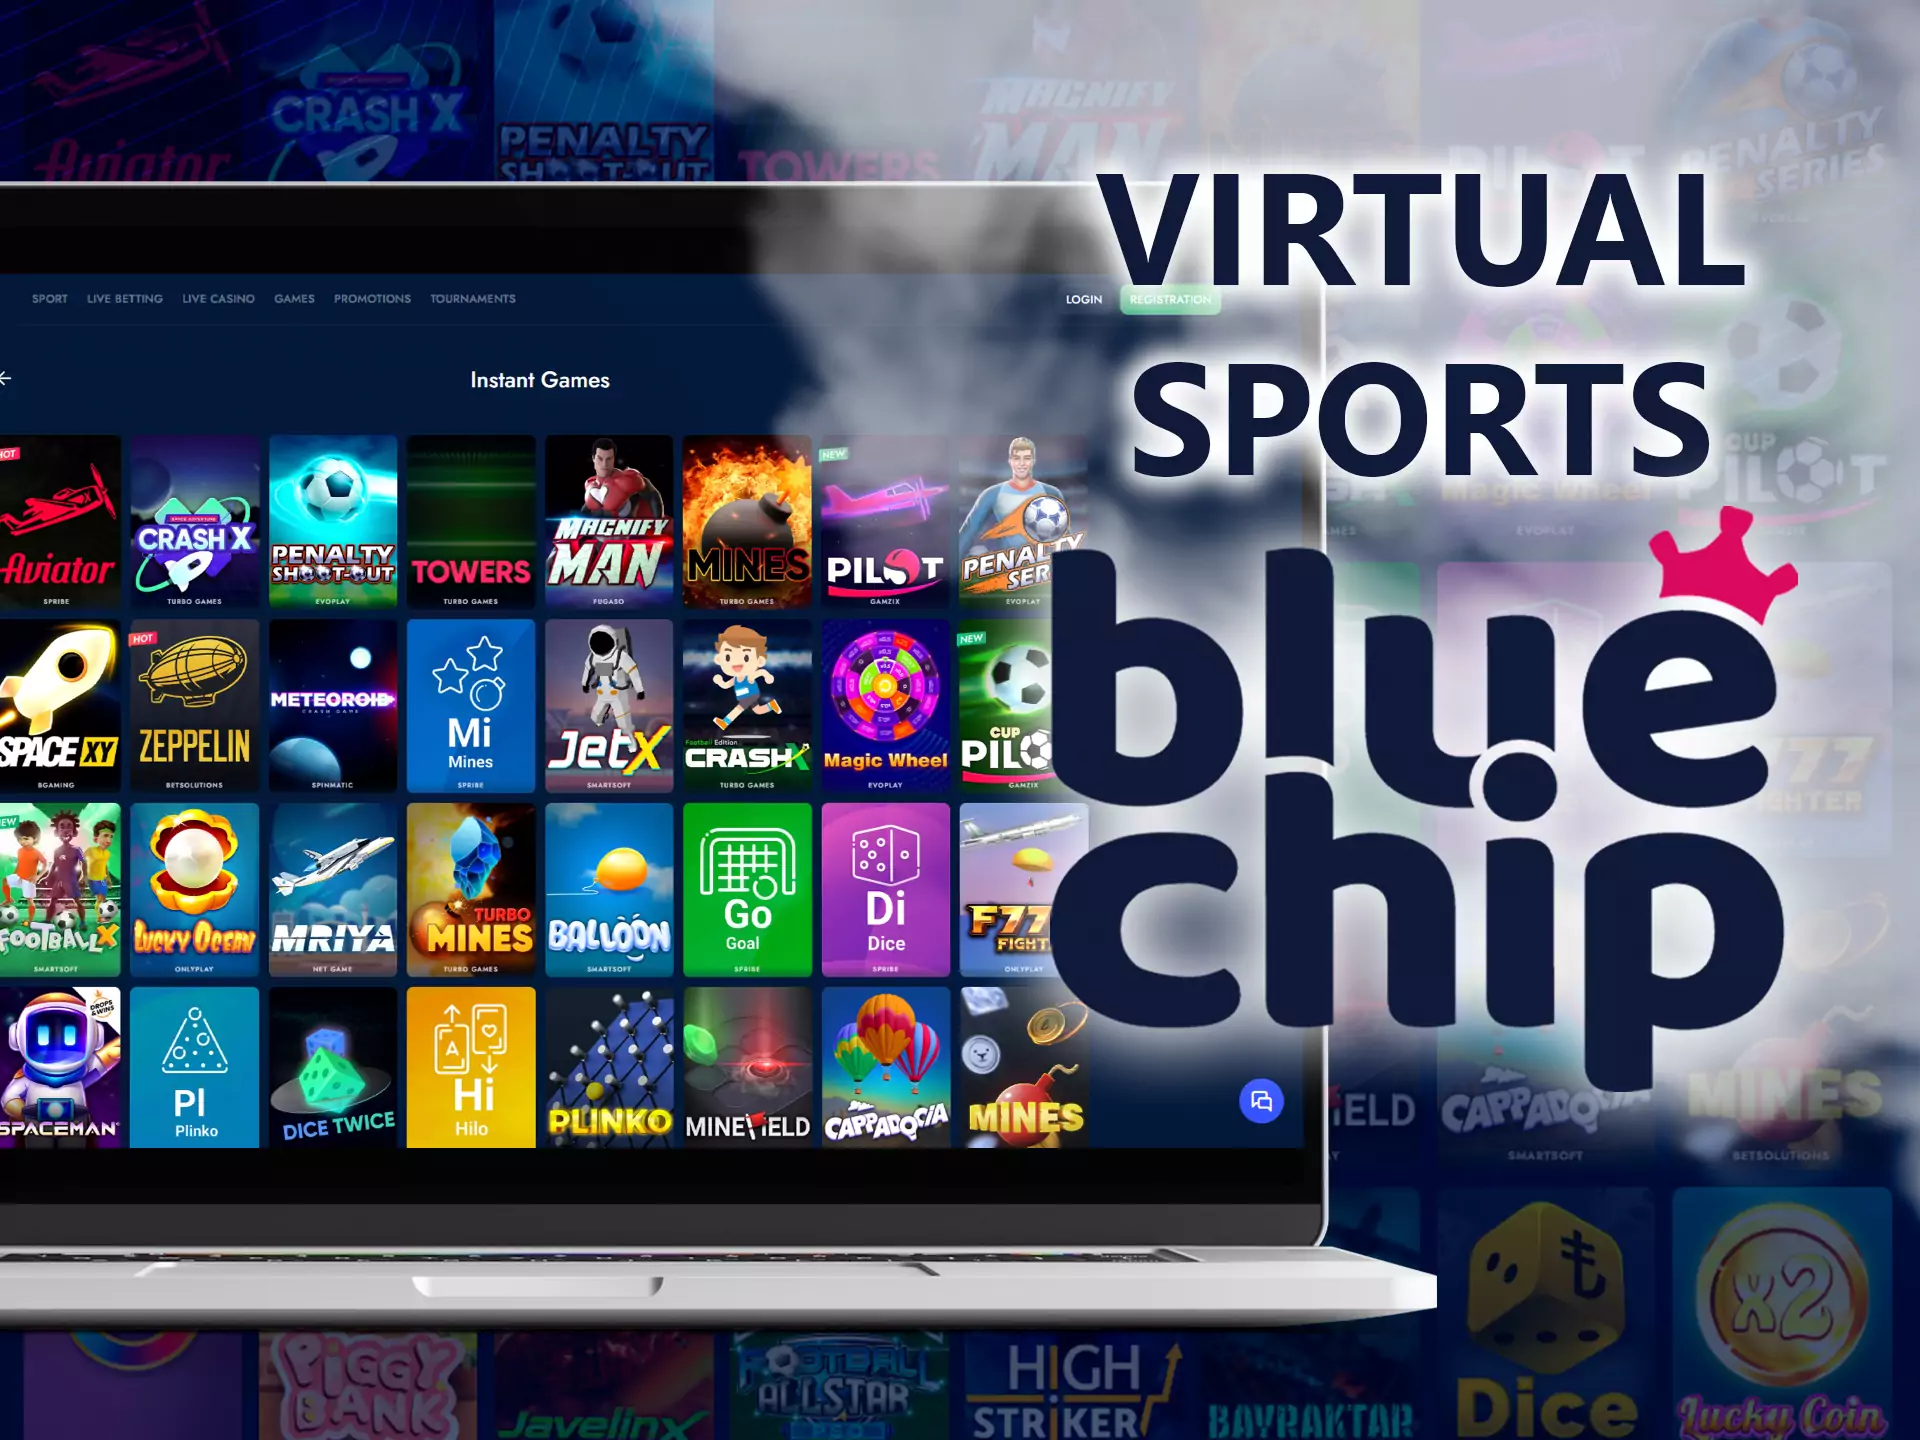 Besides ordinary betting, you can try virtual sports on Bluechip.